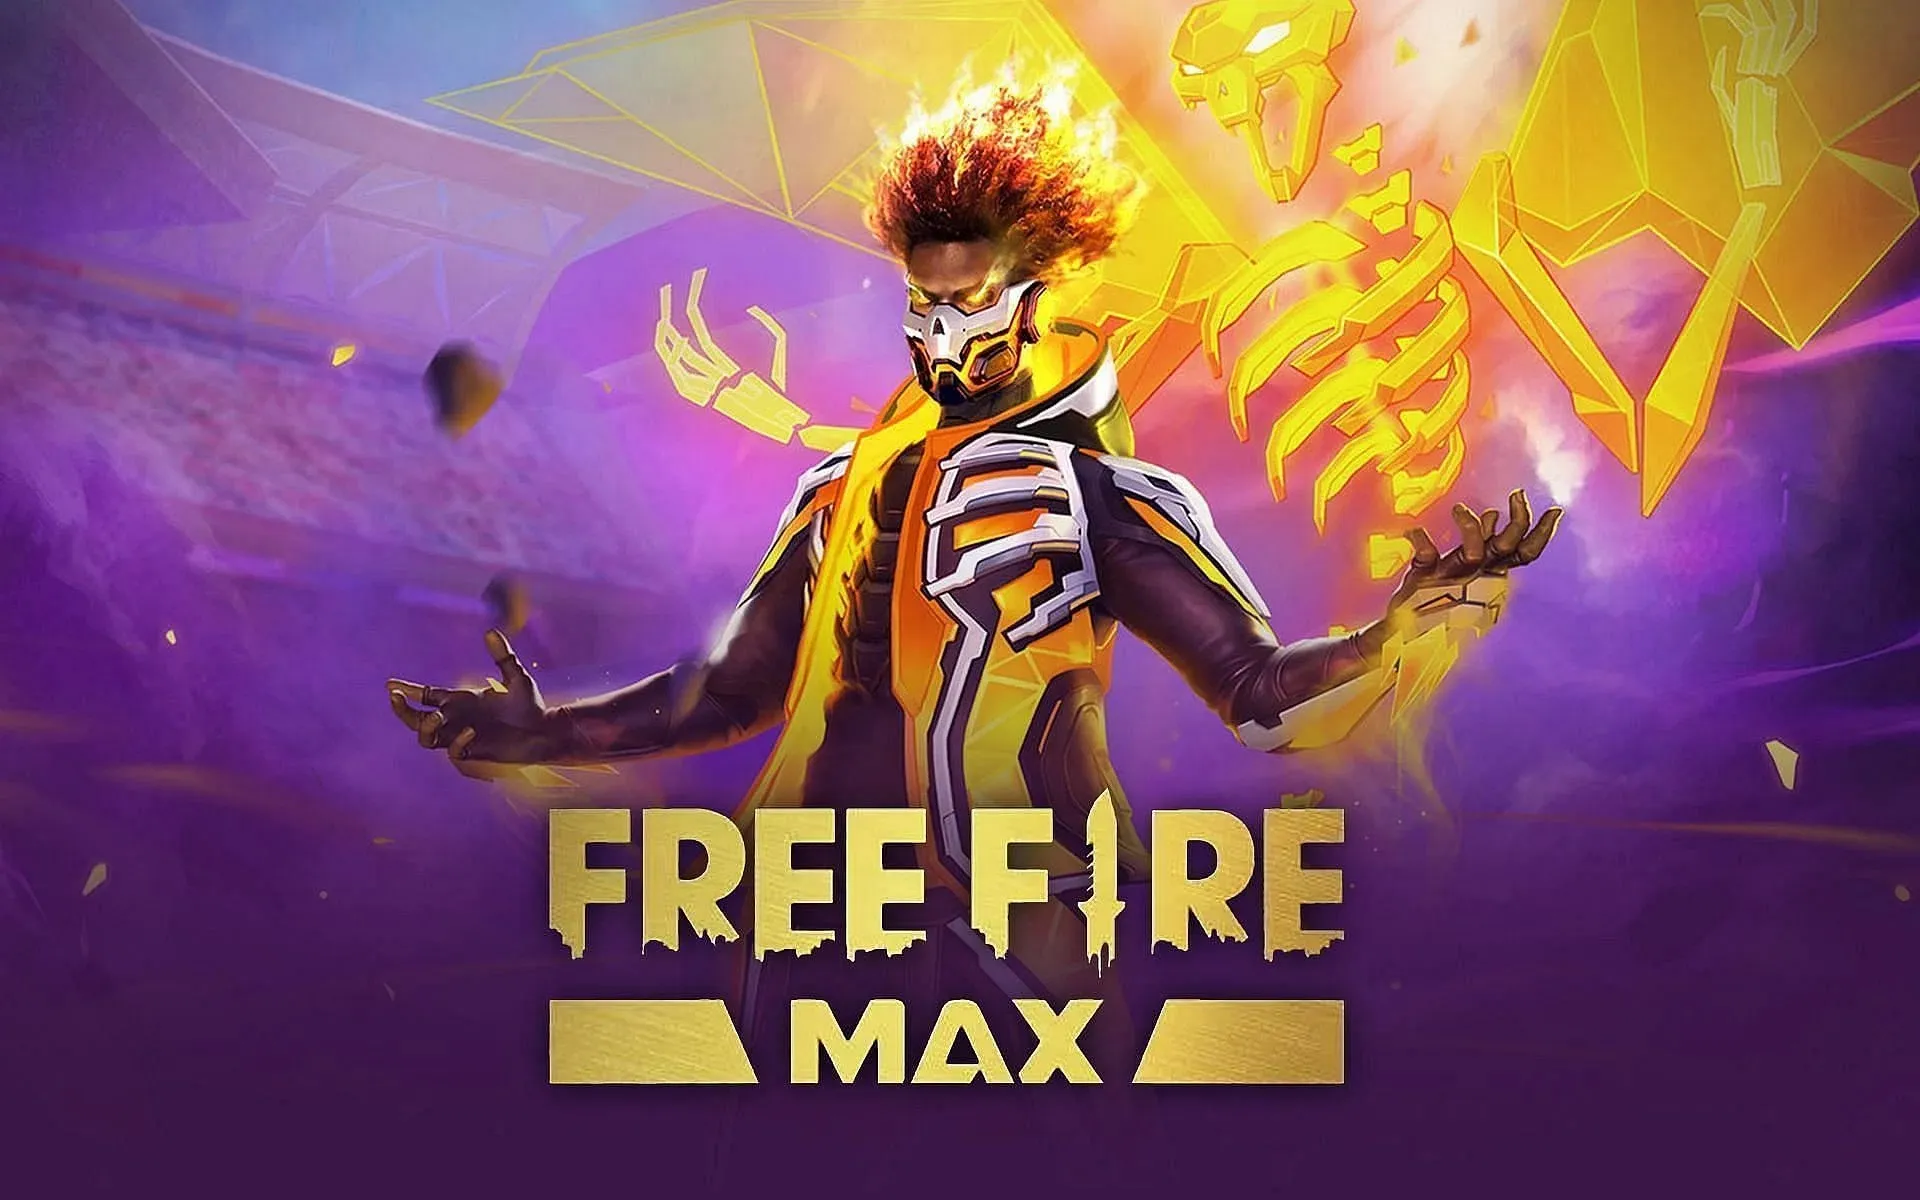 Garena Free Fire Max: All the codes revealed for August 12, 2022